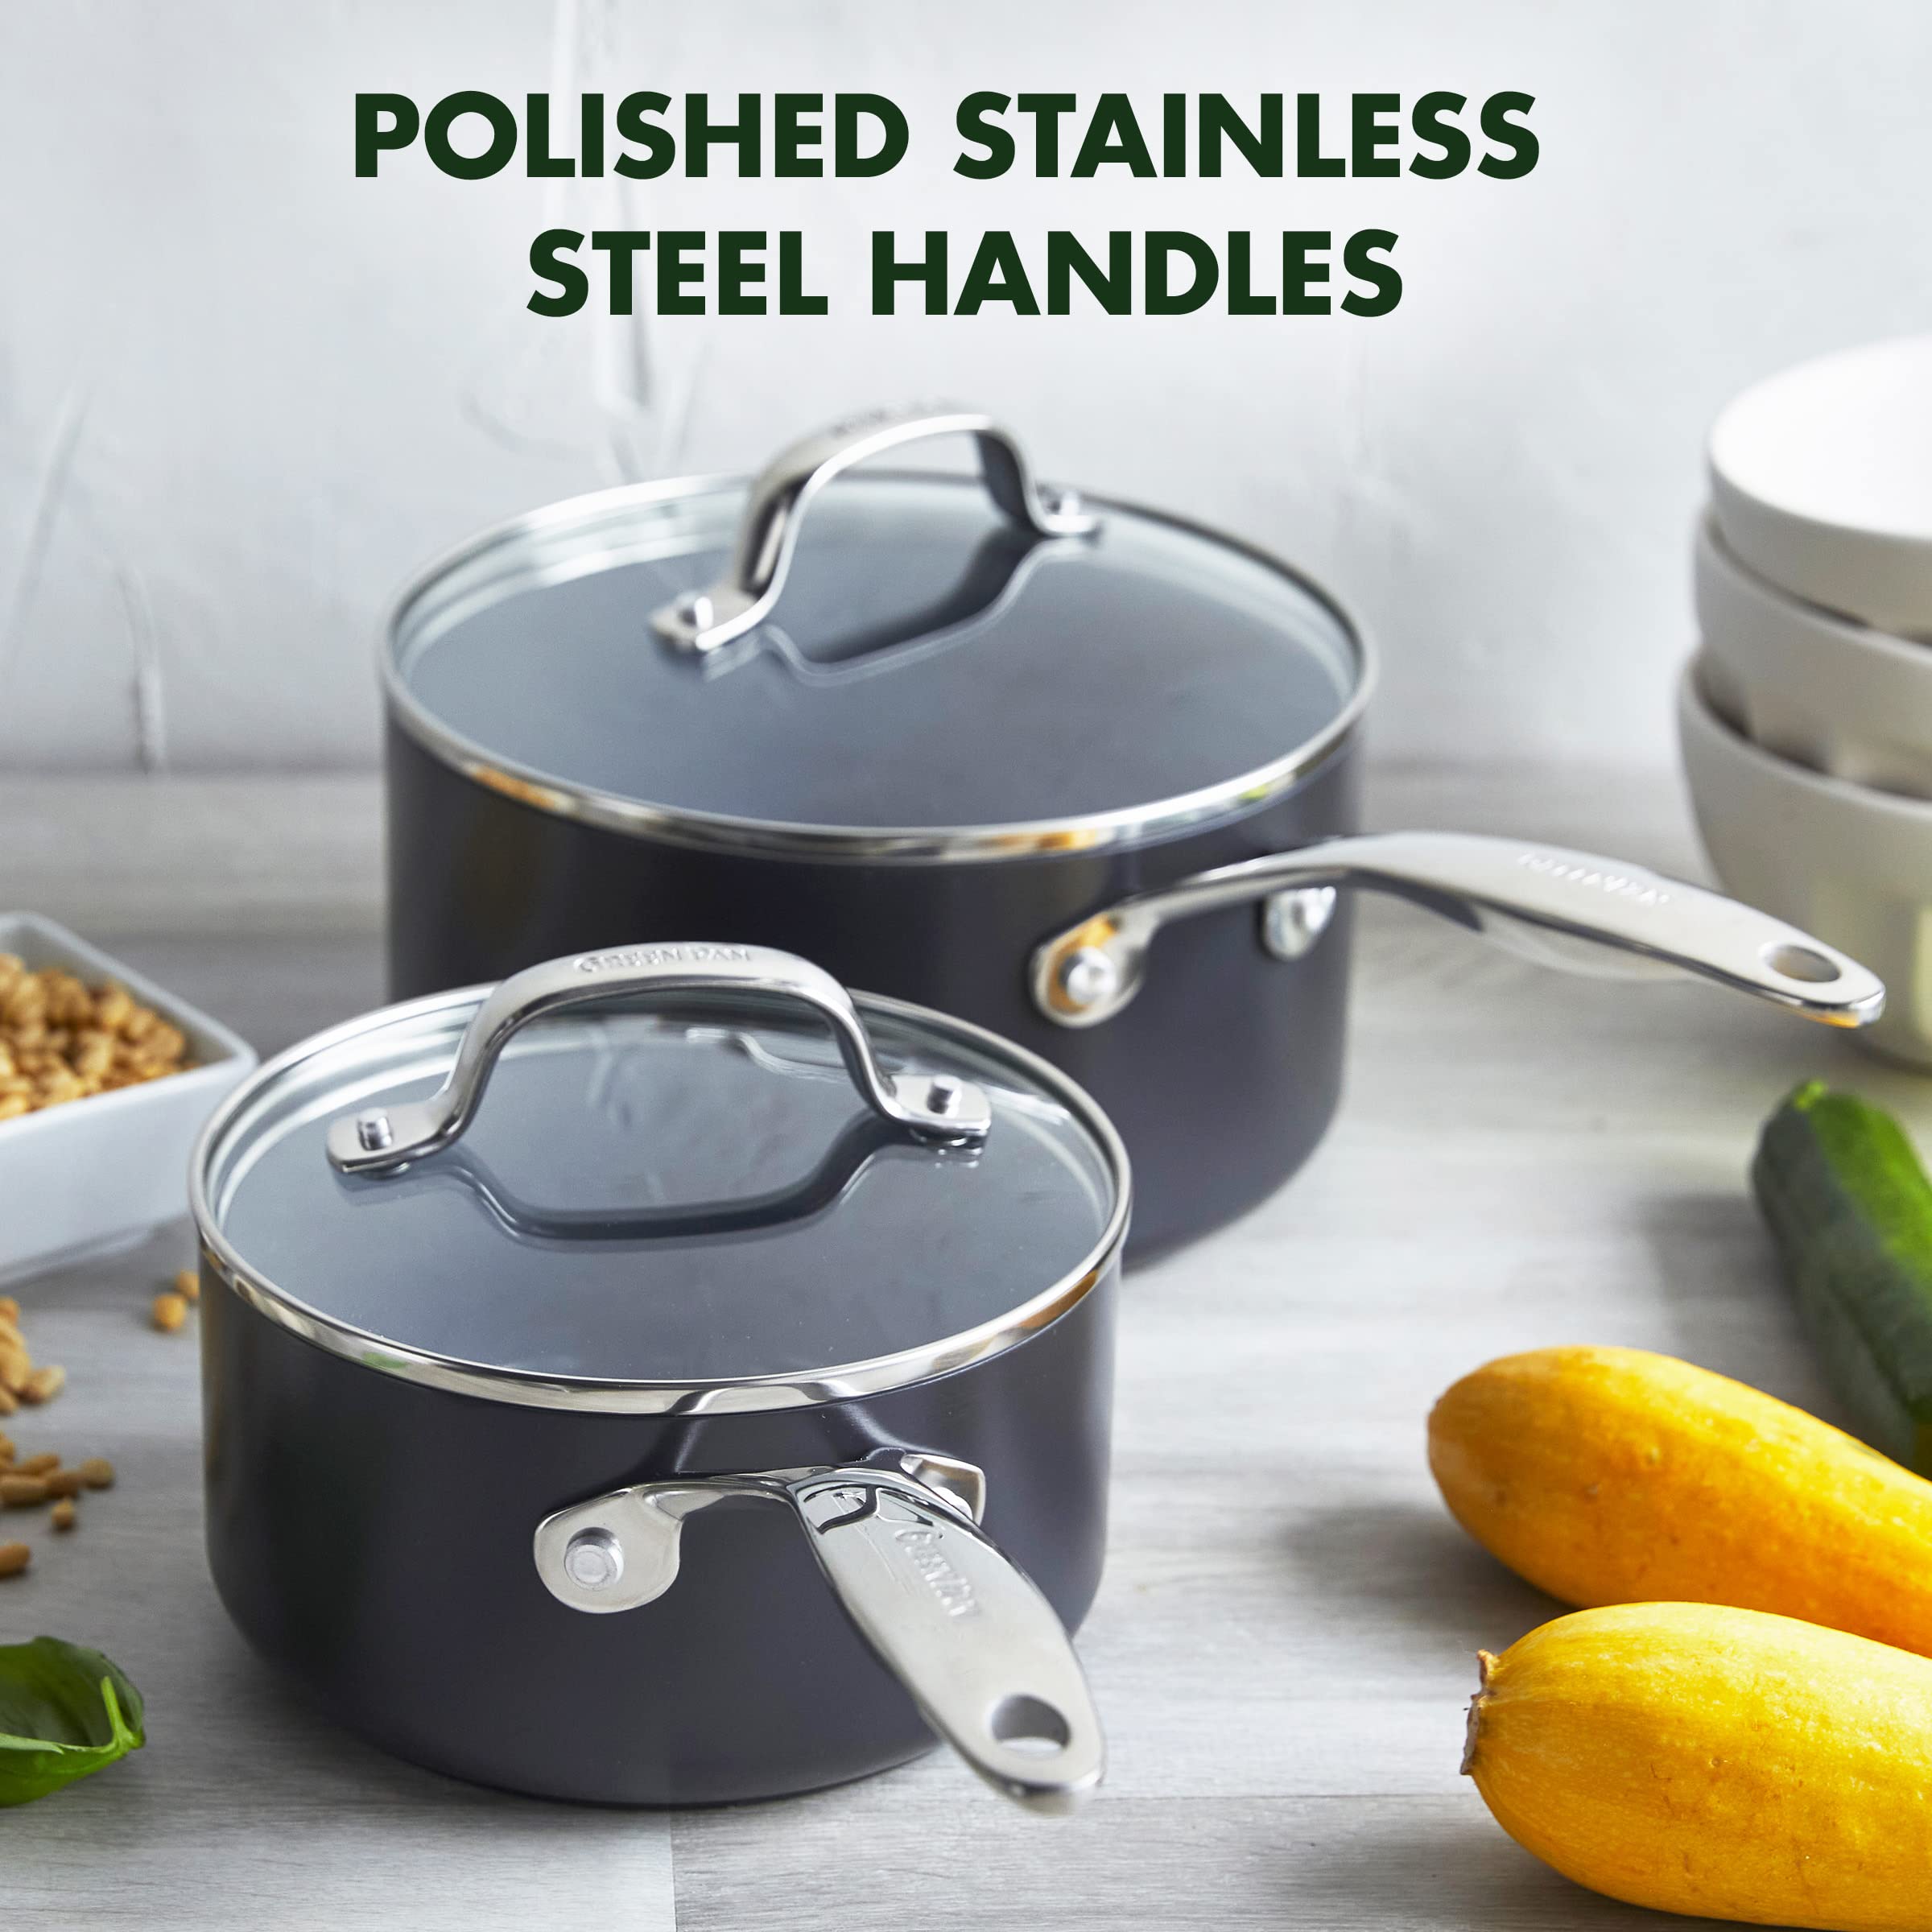 GreenPan Valencia Pro Hard Anodized Healthy Ceramic Nonstick 2QT and 3QT Saucepan Pot Set with Lids, PFAS-Free, Induction, Dishwasher Safe, Oven Safe, Gray